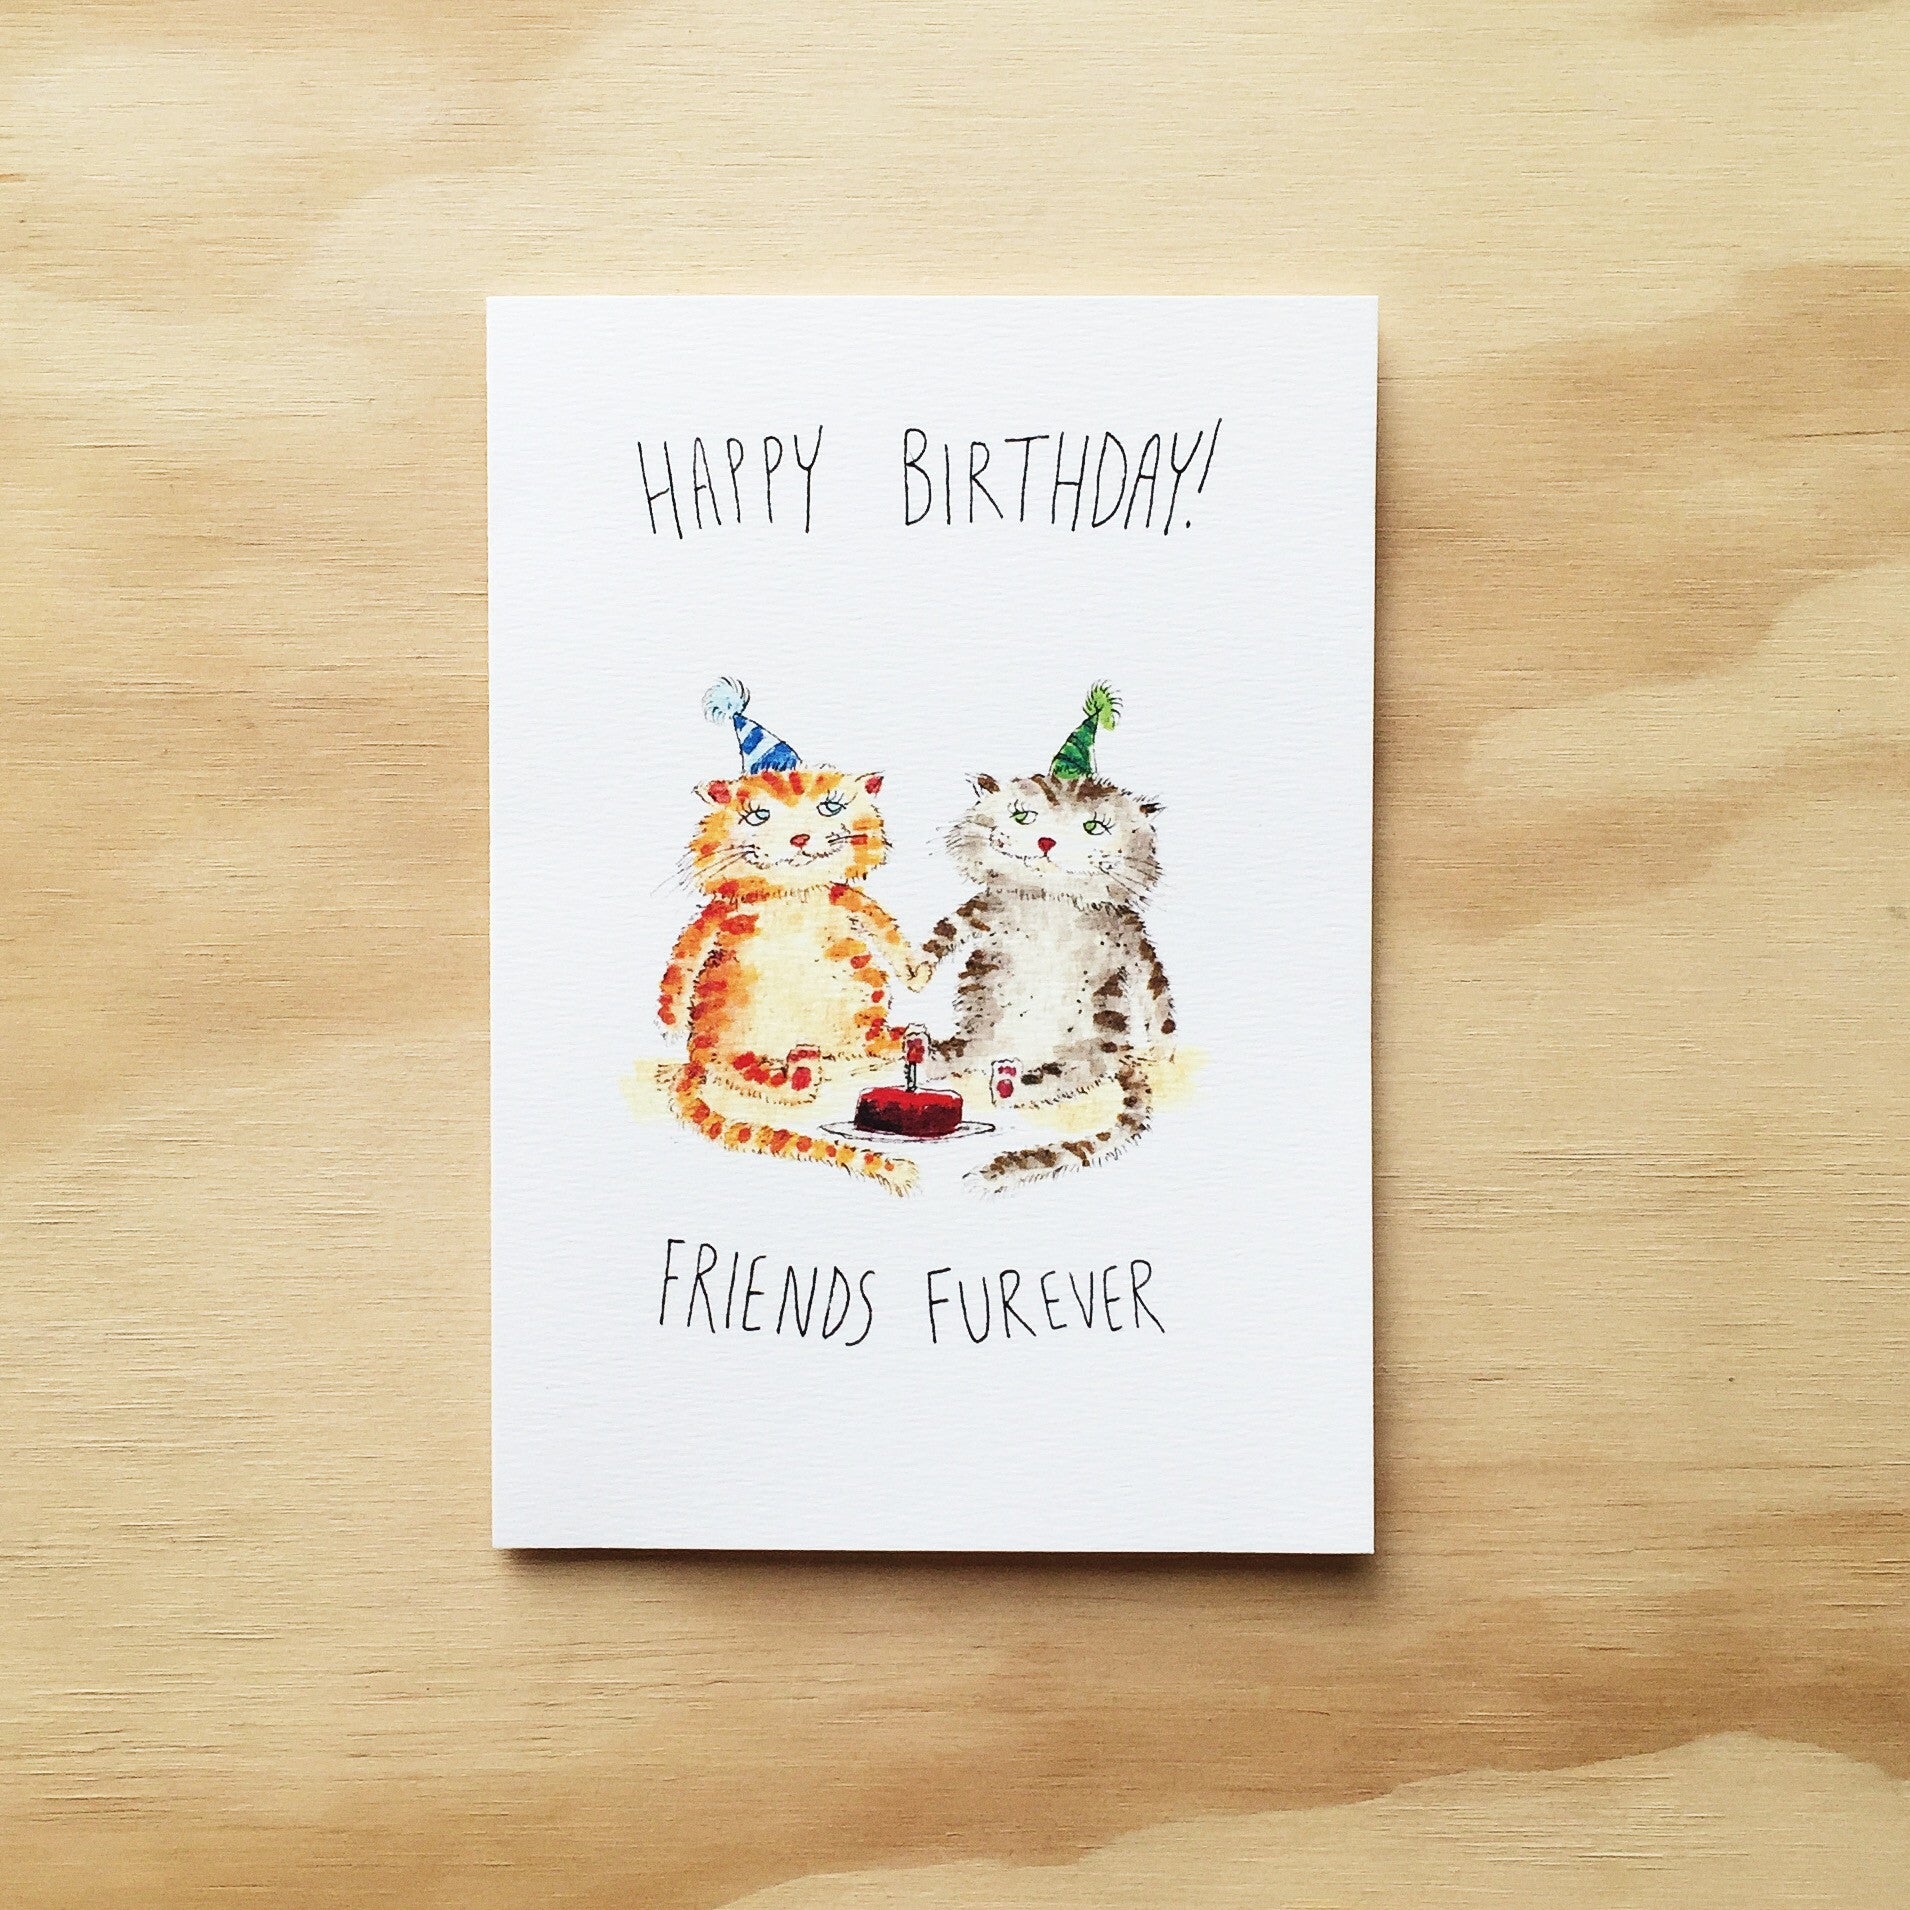 Happy Birthday, Friends Furever | unique card | lovely card | wishing card